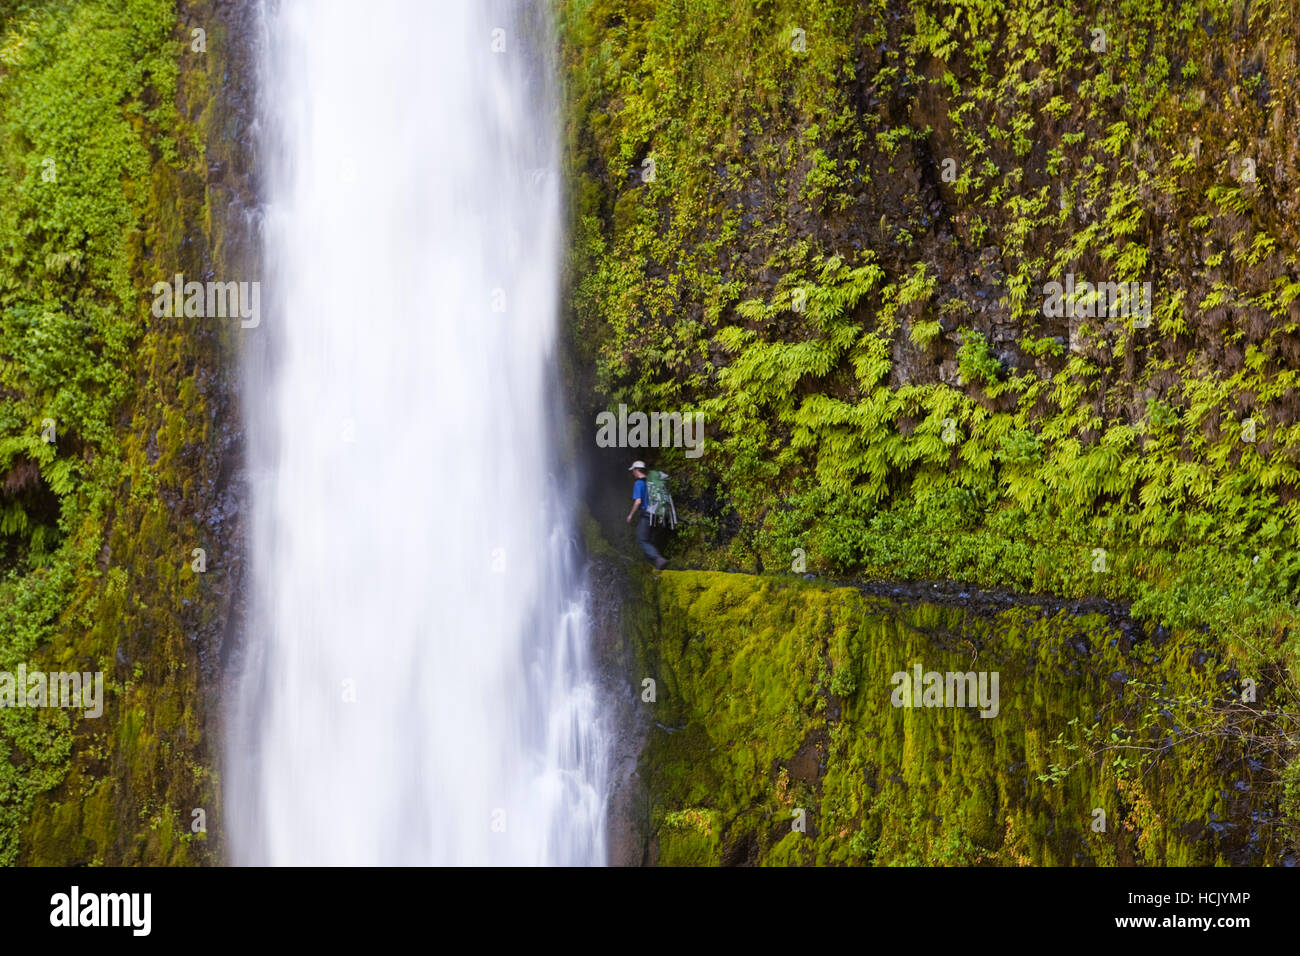 Hiker Zach Podell-Eberhardt walks past Tunnel Falls on the Eagle Creek Trail, cut into the basalt cliff behind the waterfall, in Columbia River Gorge National Scenic Area, Oregon. Stock Photo